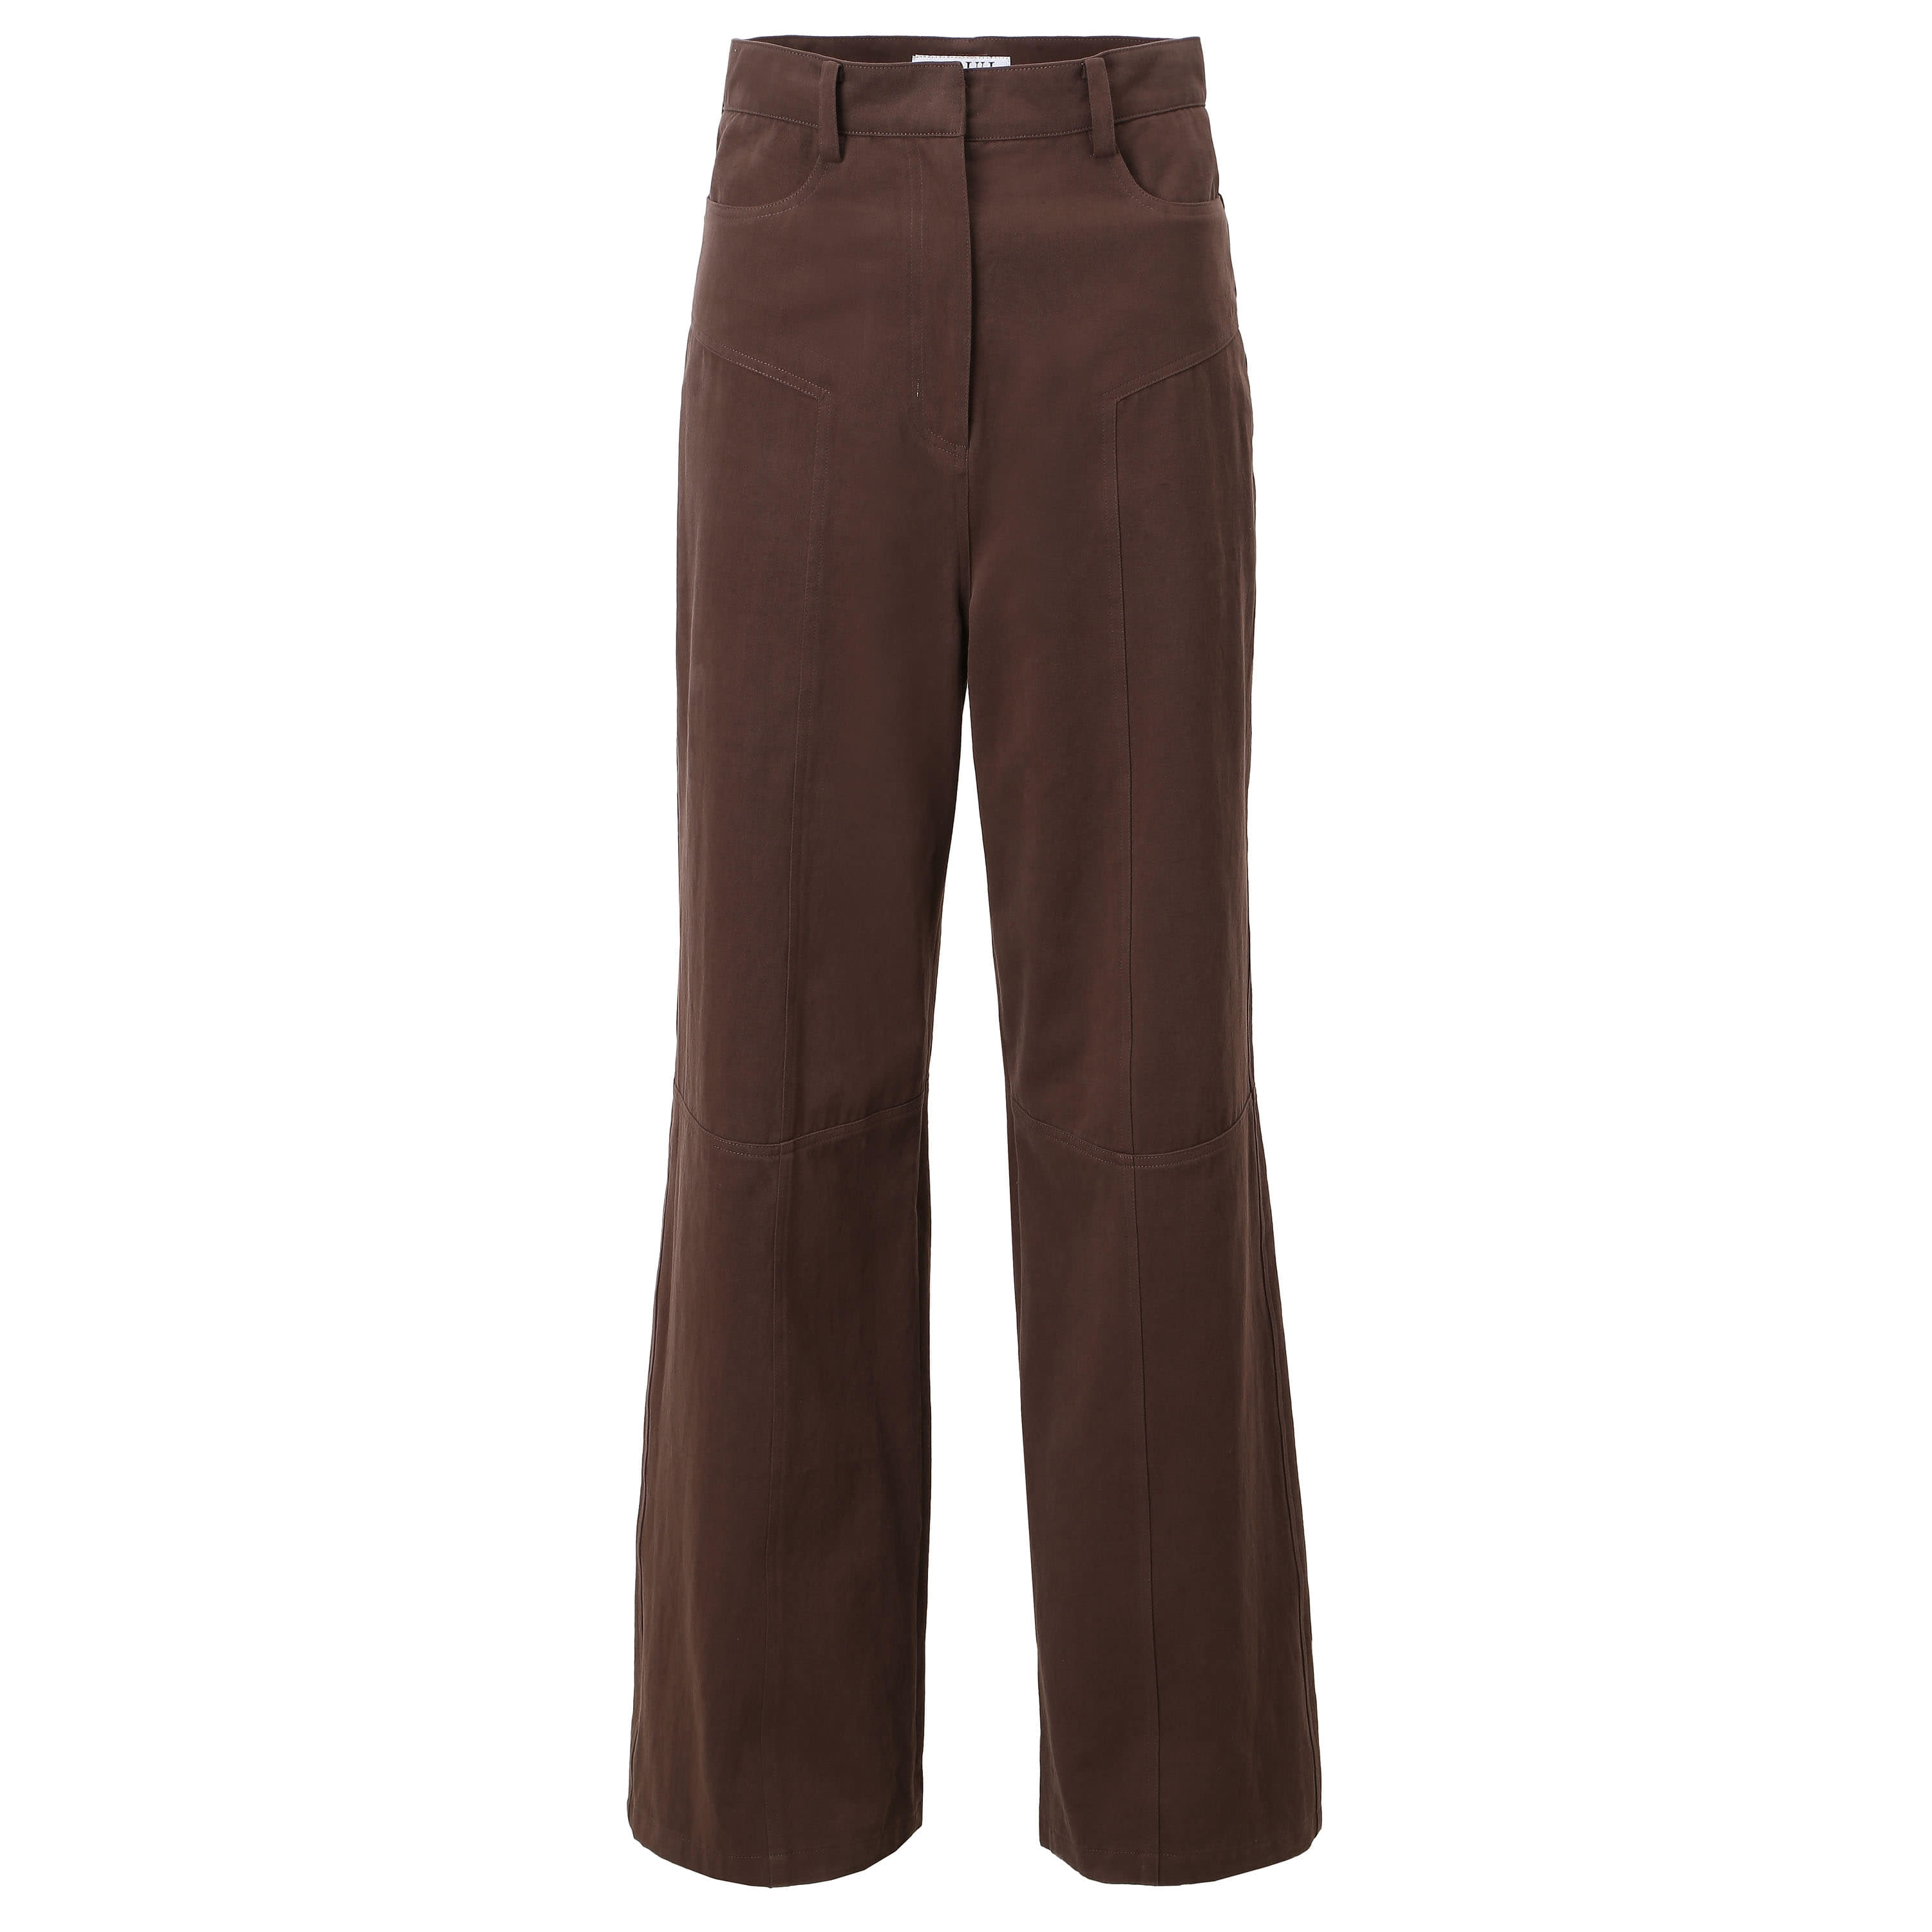 WIDE COTTON TROUSERS (BROWN)